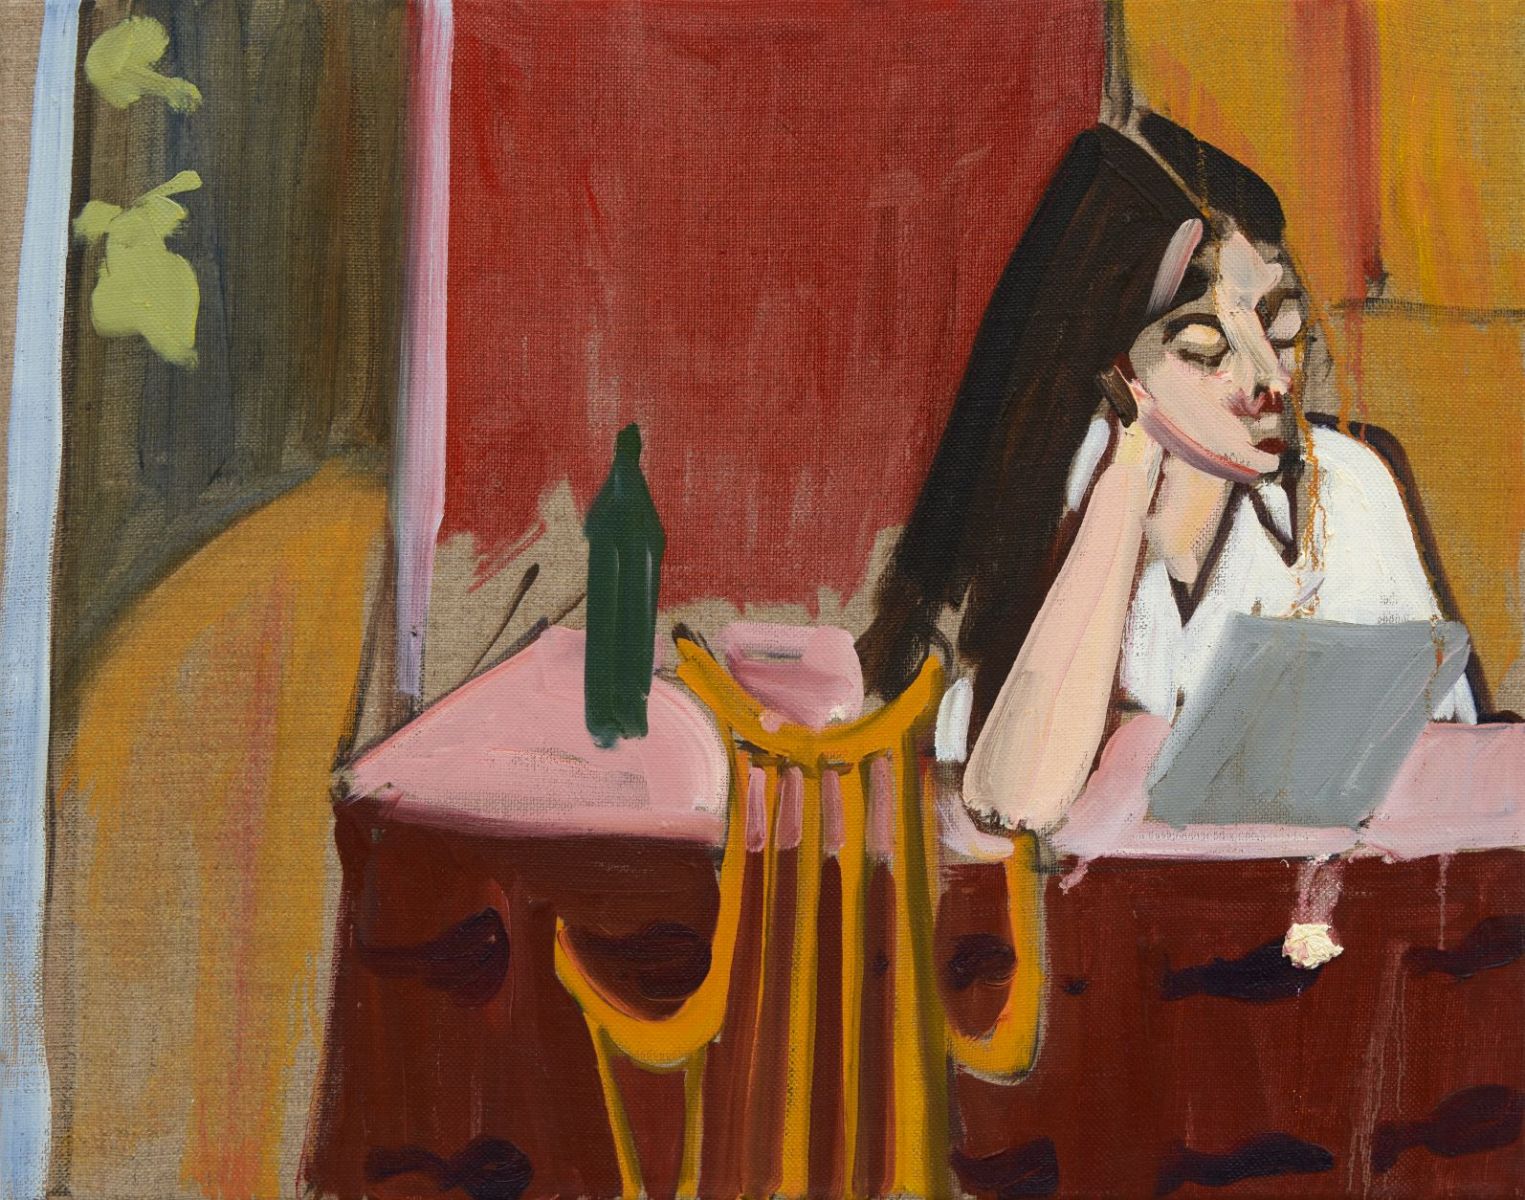 Esme at the Kitchen Table, Chantal Joffe, 2020, oil on canvas, Photograhy by Benjamin Westoby © Chantal Joffe courtesy the artist and Victoria Miro.